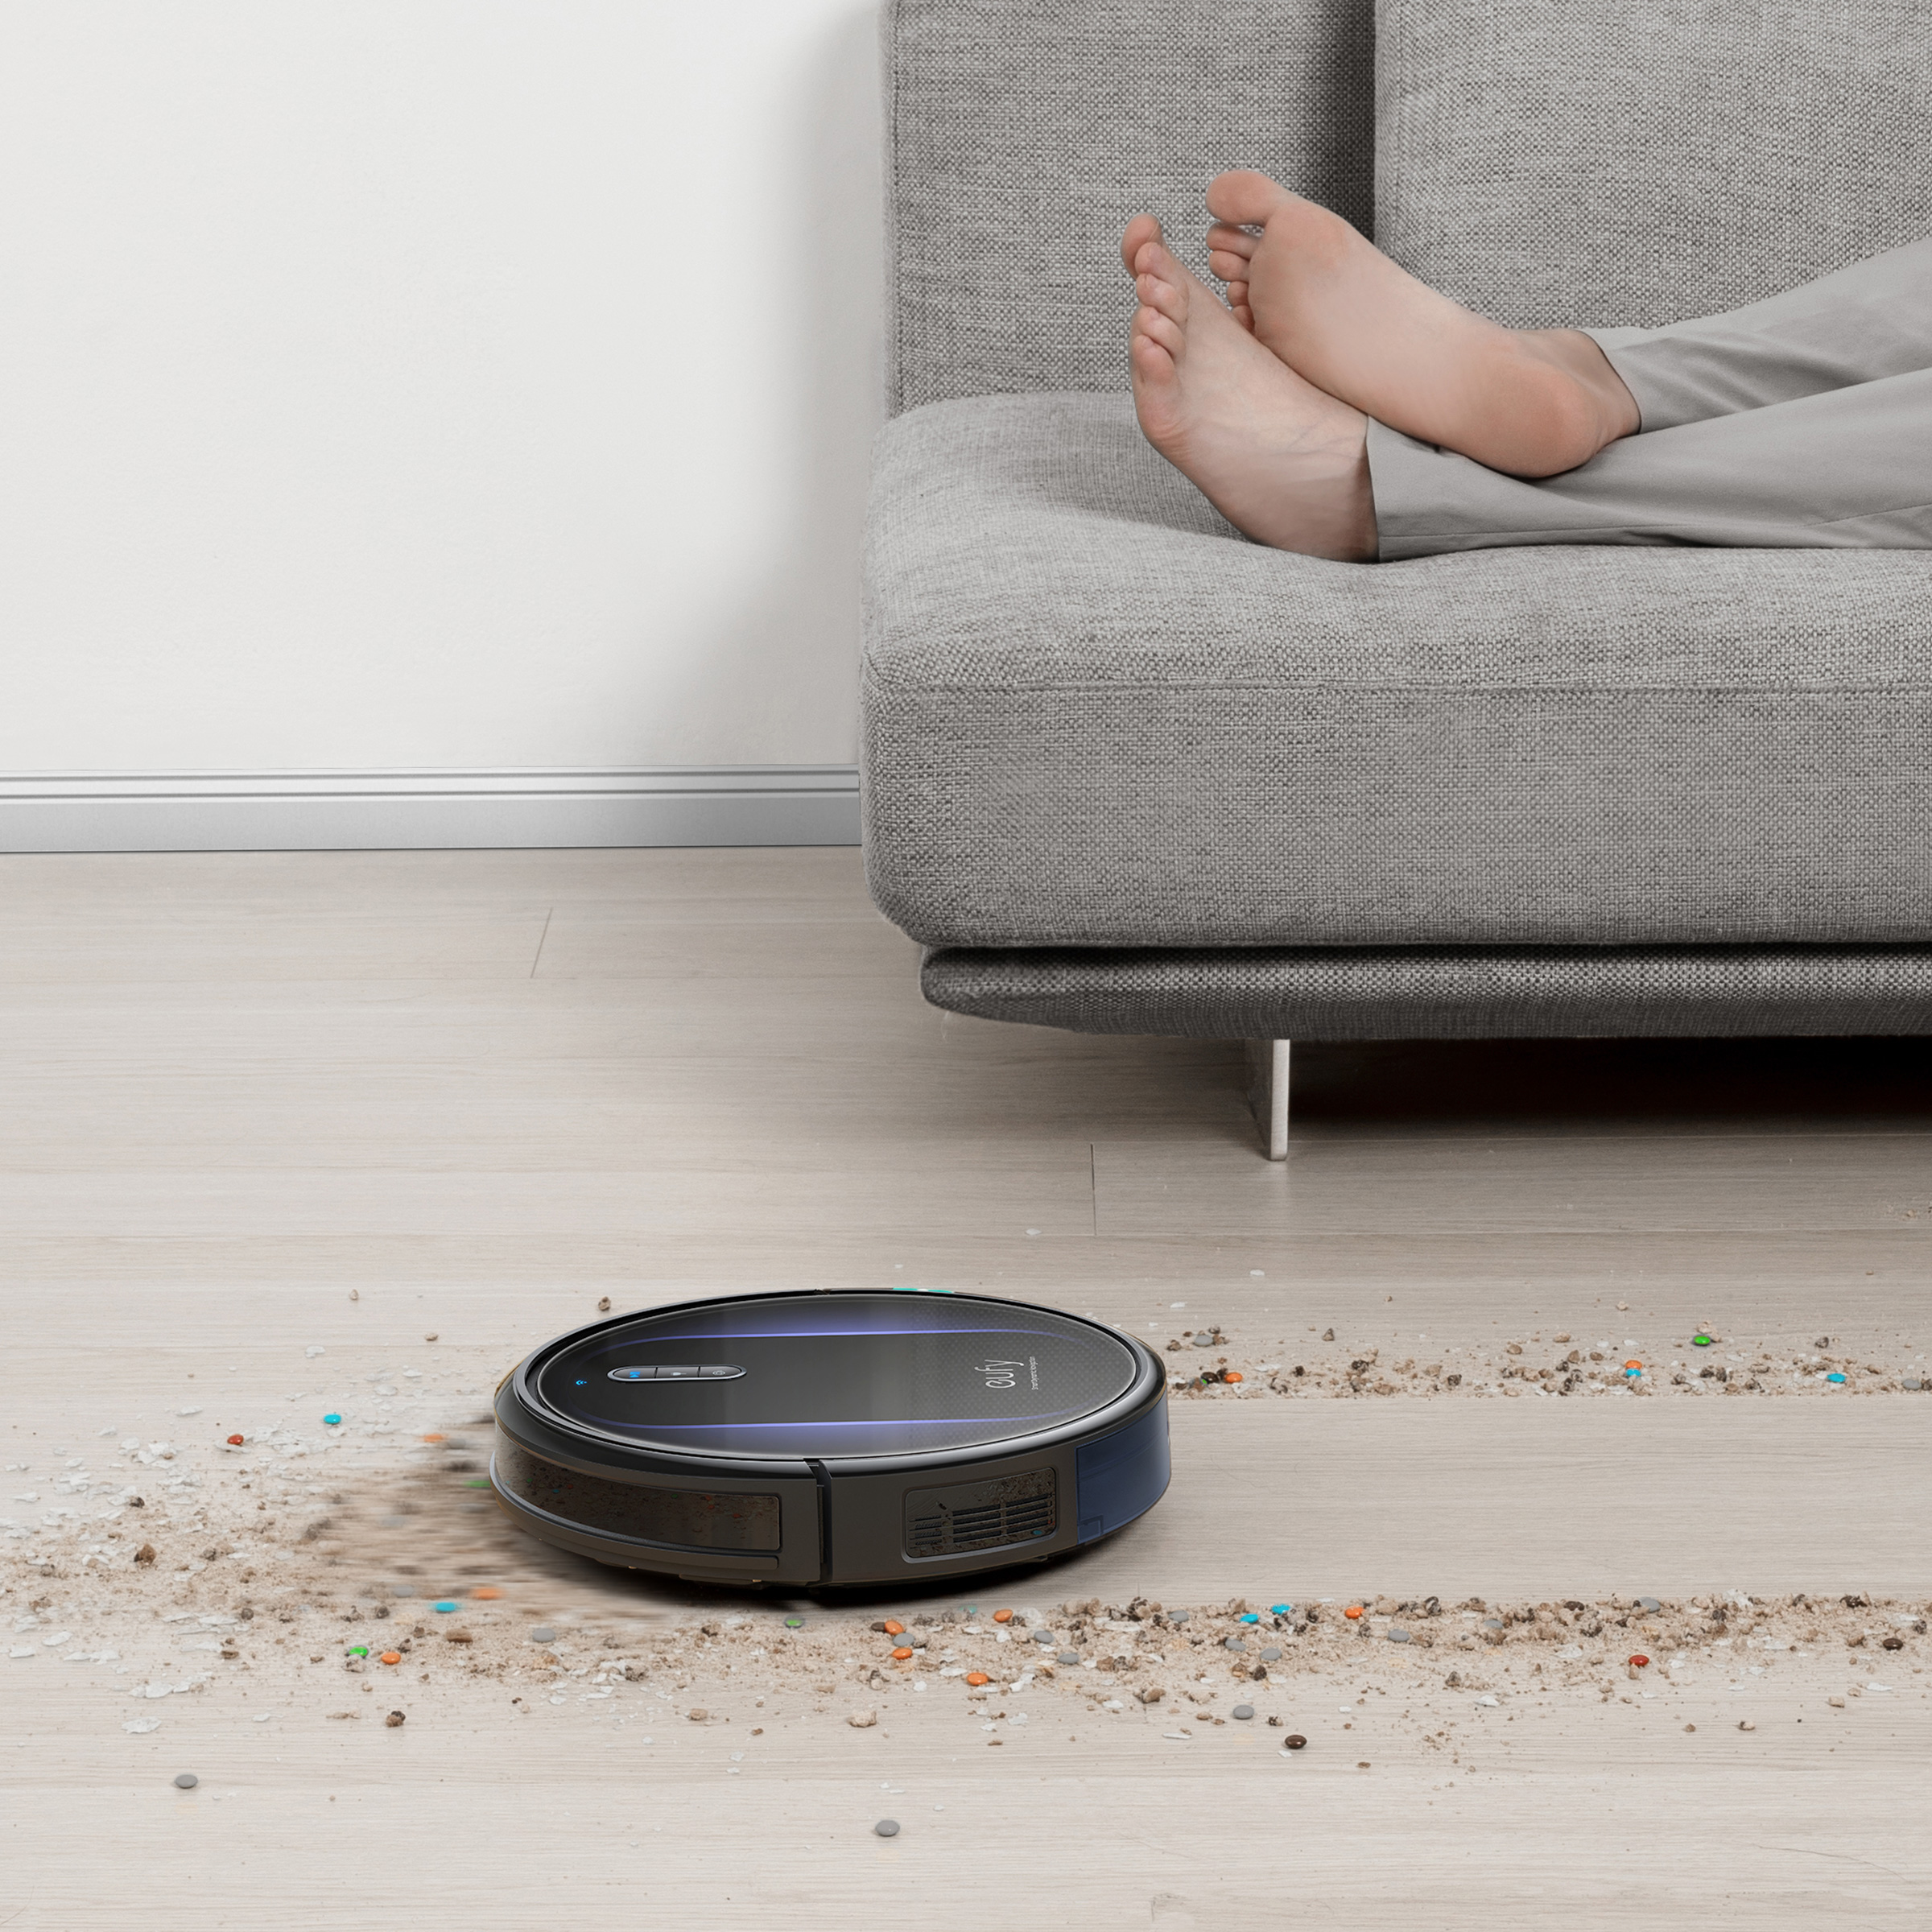 eufy Clean by Anker RoboVac G32 Pro Robot Vacuum with Home Mapping, 2000 Pa Strong Suction, Wi-Fi enabled, Ideal for Carpets, Hardwood Floors, and Pet Owners, Supports Only 2.4Ghz Wi-Fi - image 8 of 15